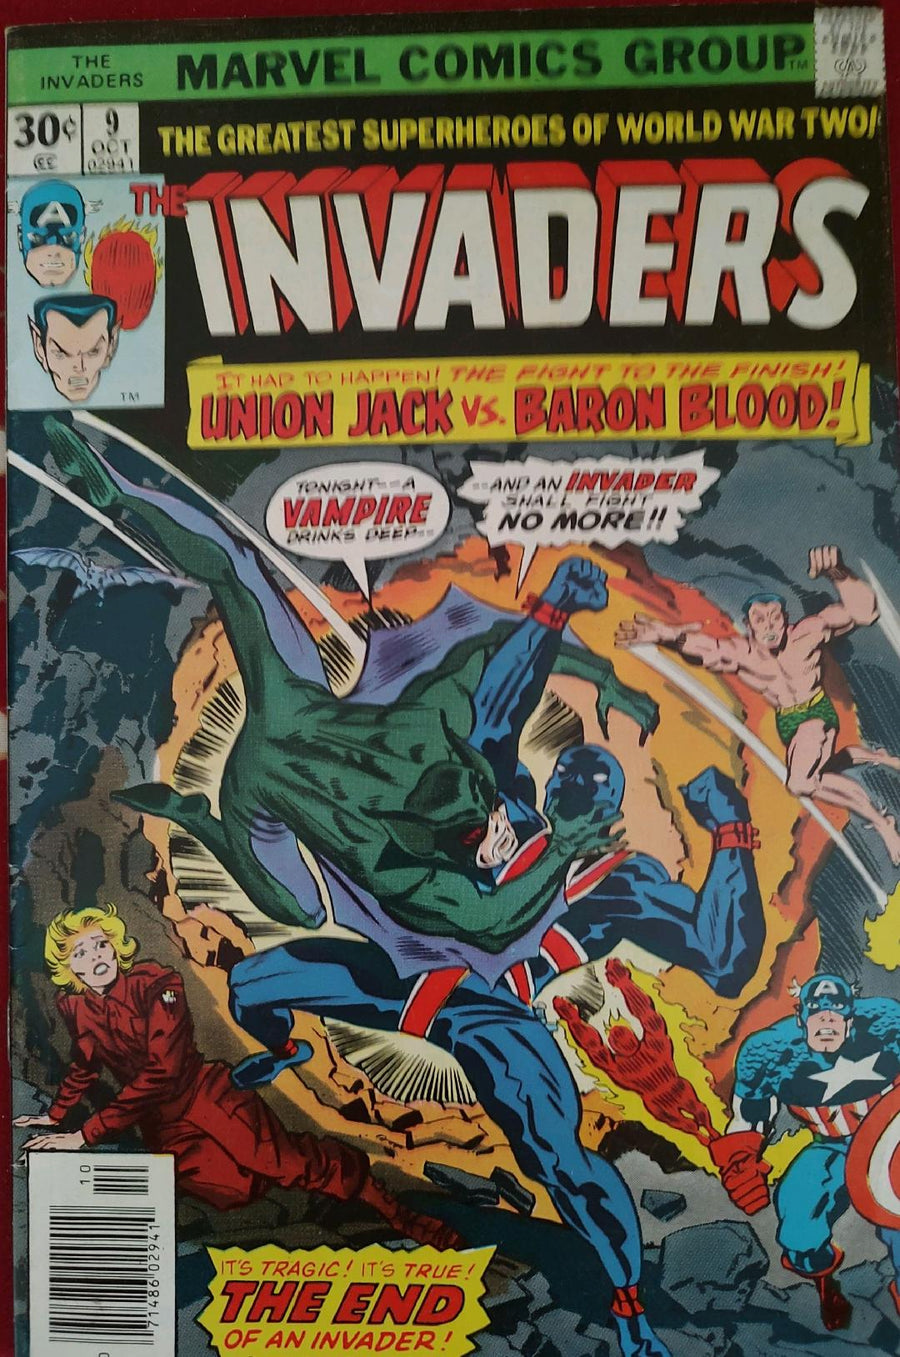 The Invaders #9 Comic Book Cover